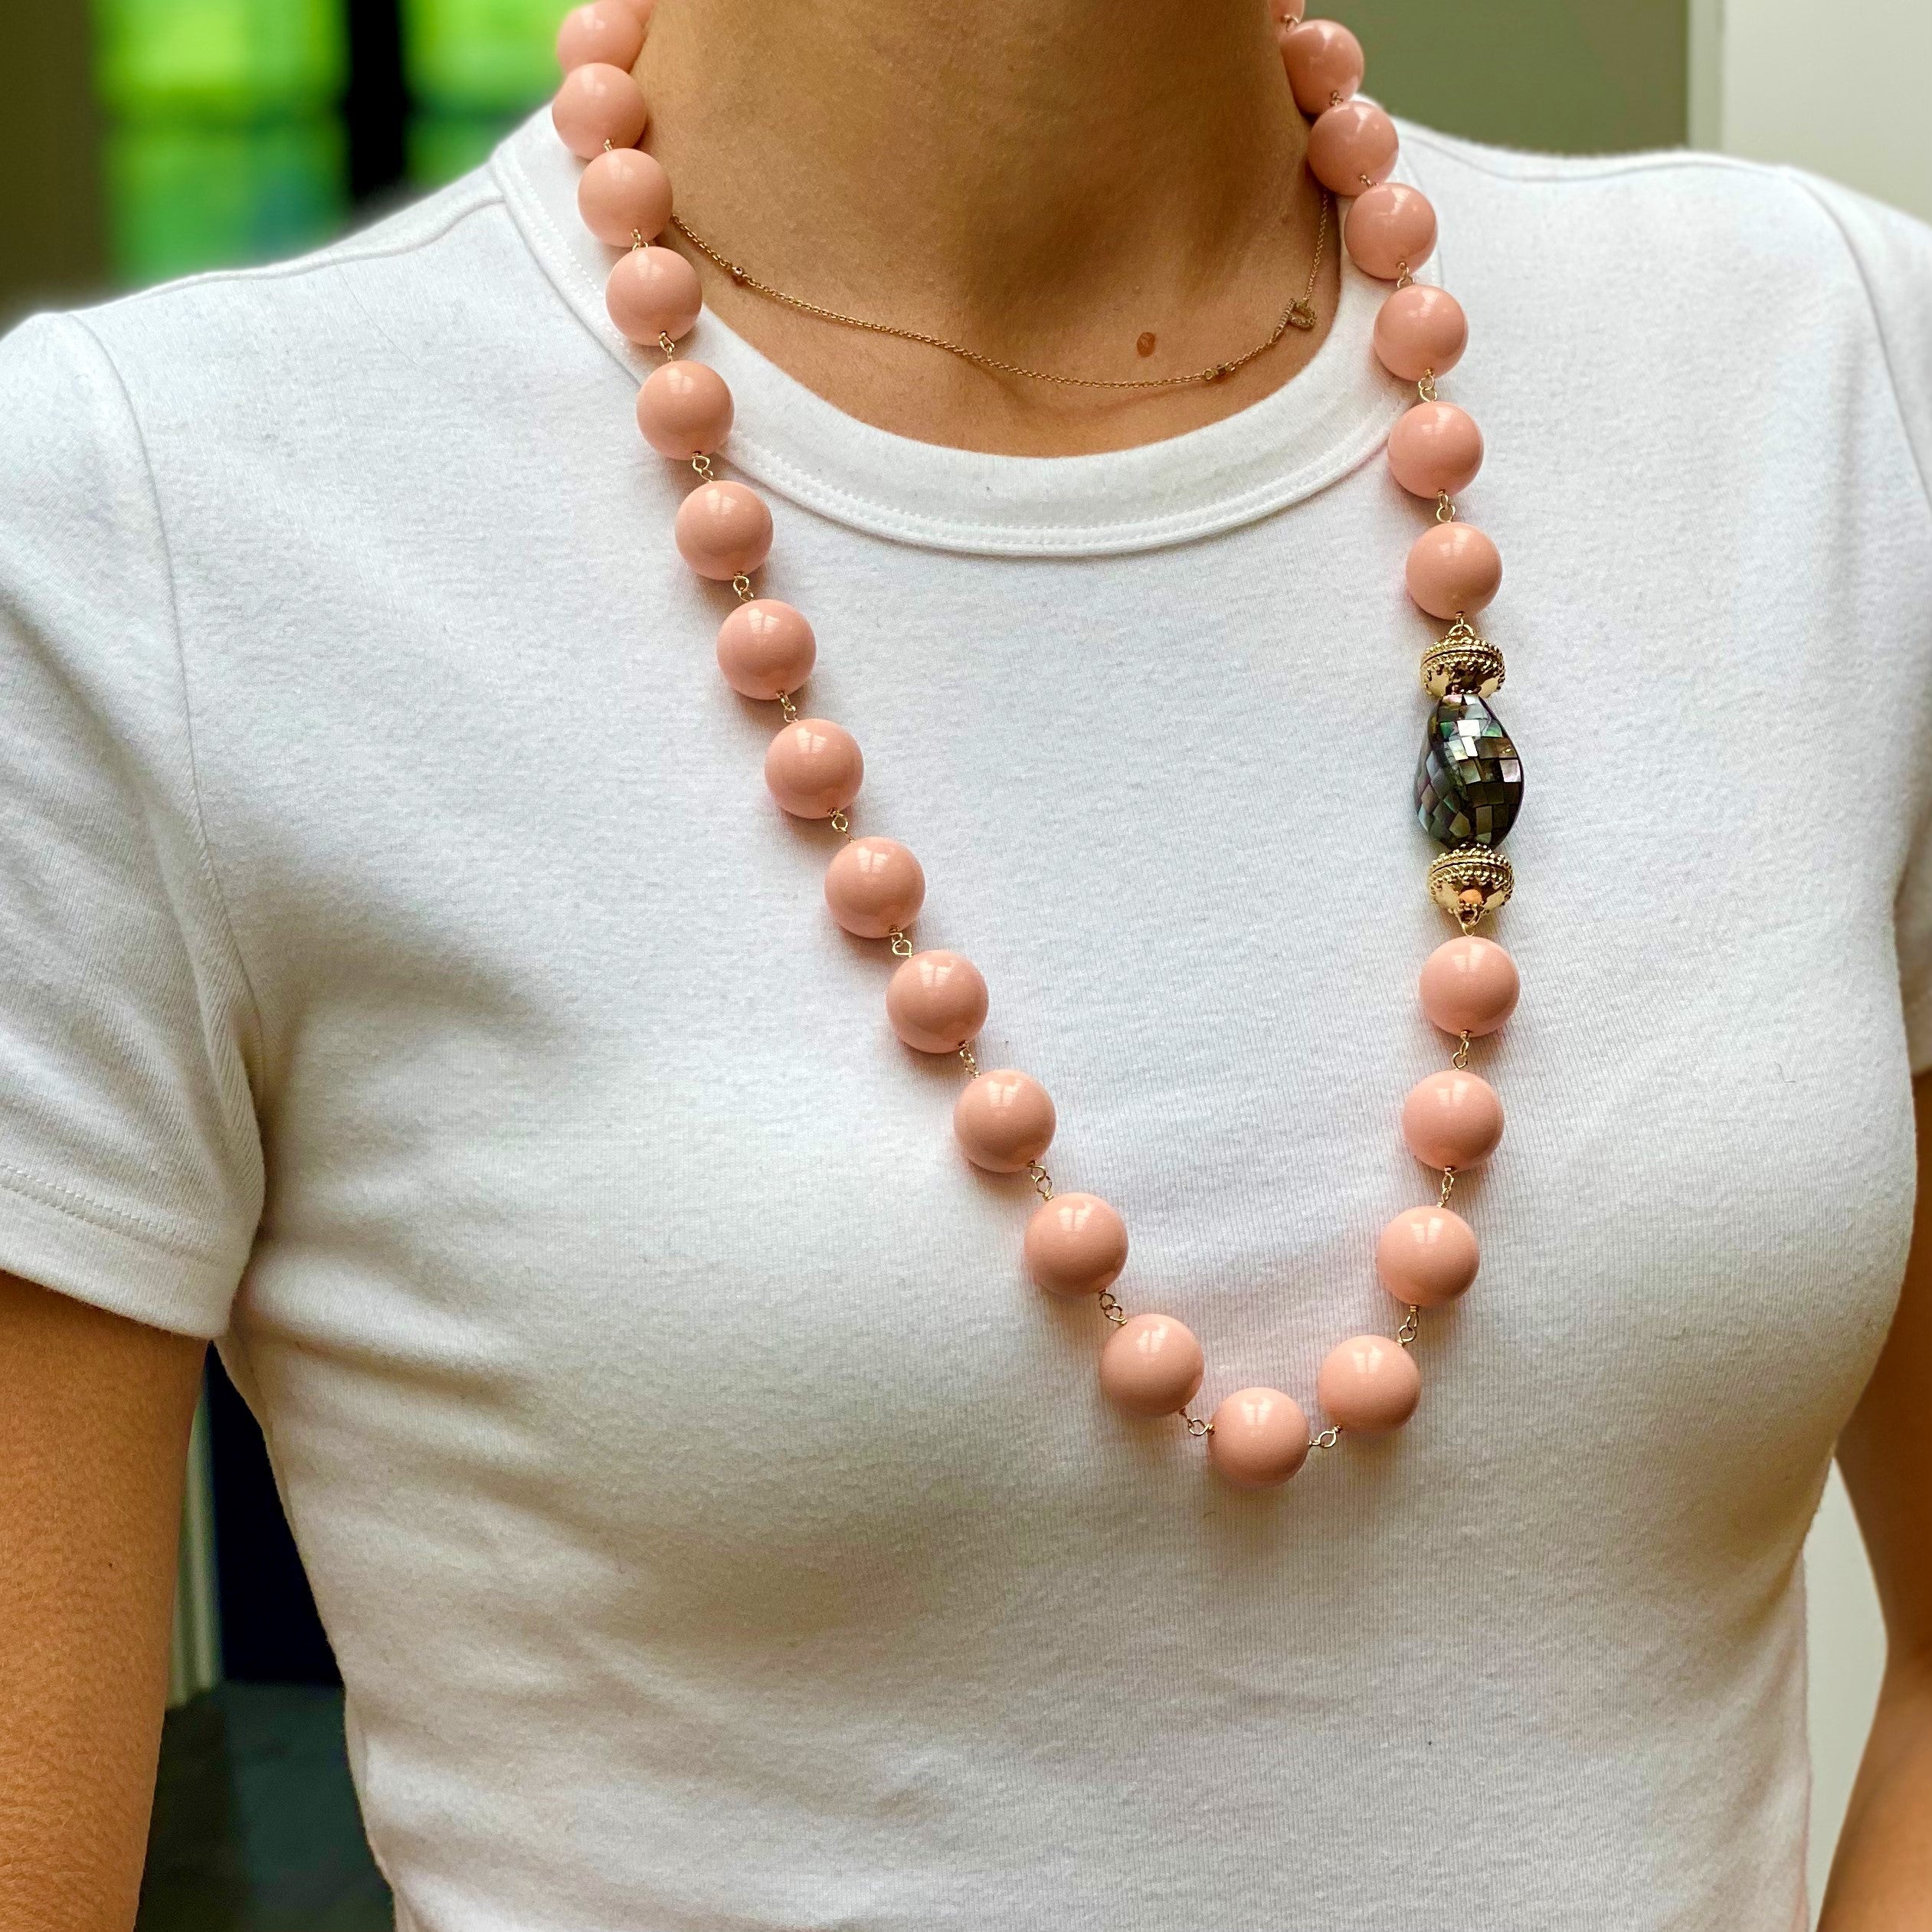 Caspian Victoire Reconstituted Light Peach Coral 16mm Necklace